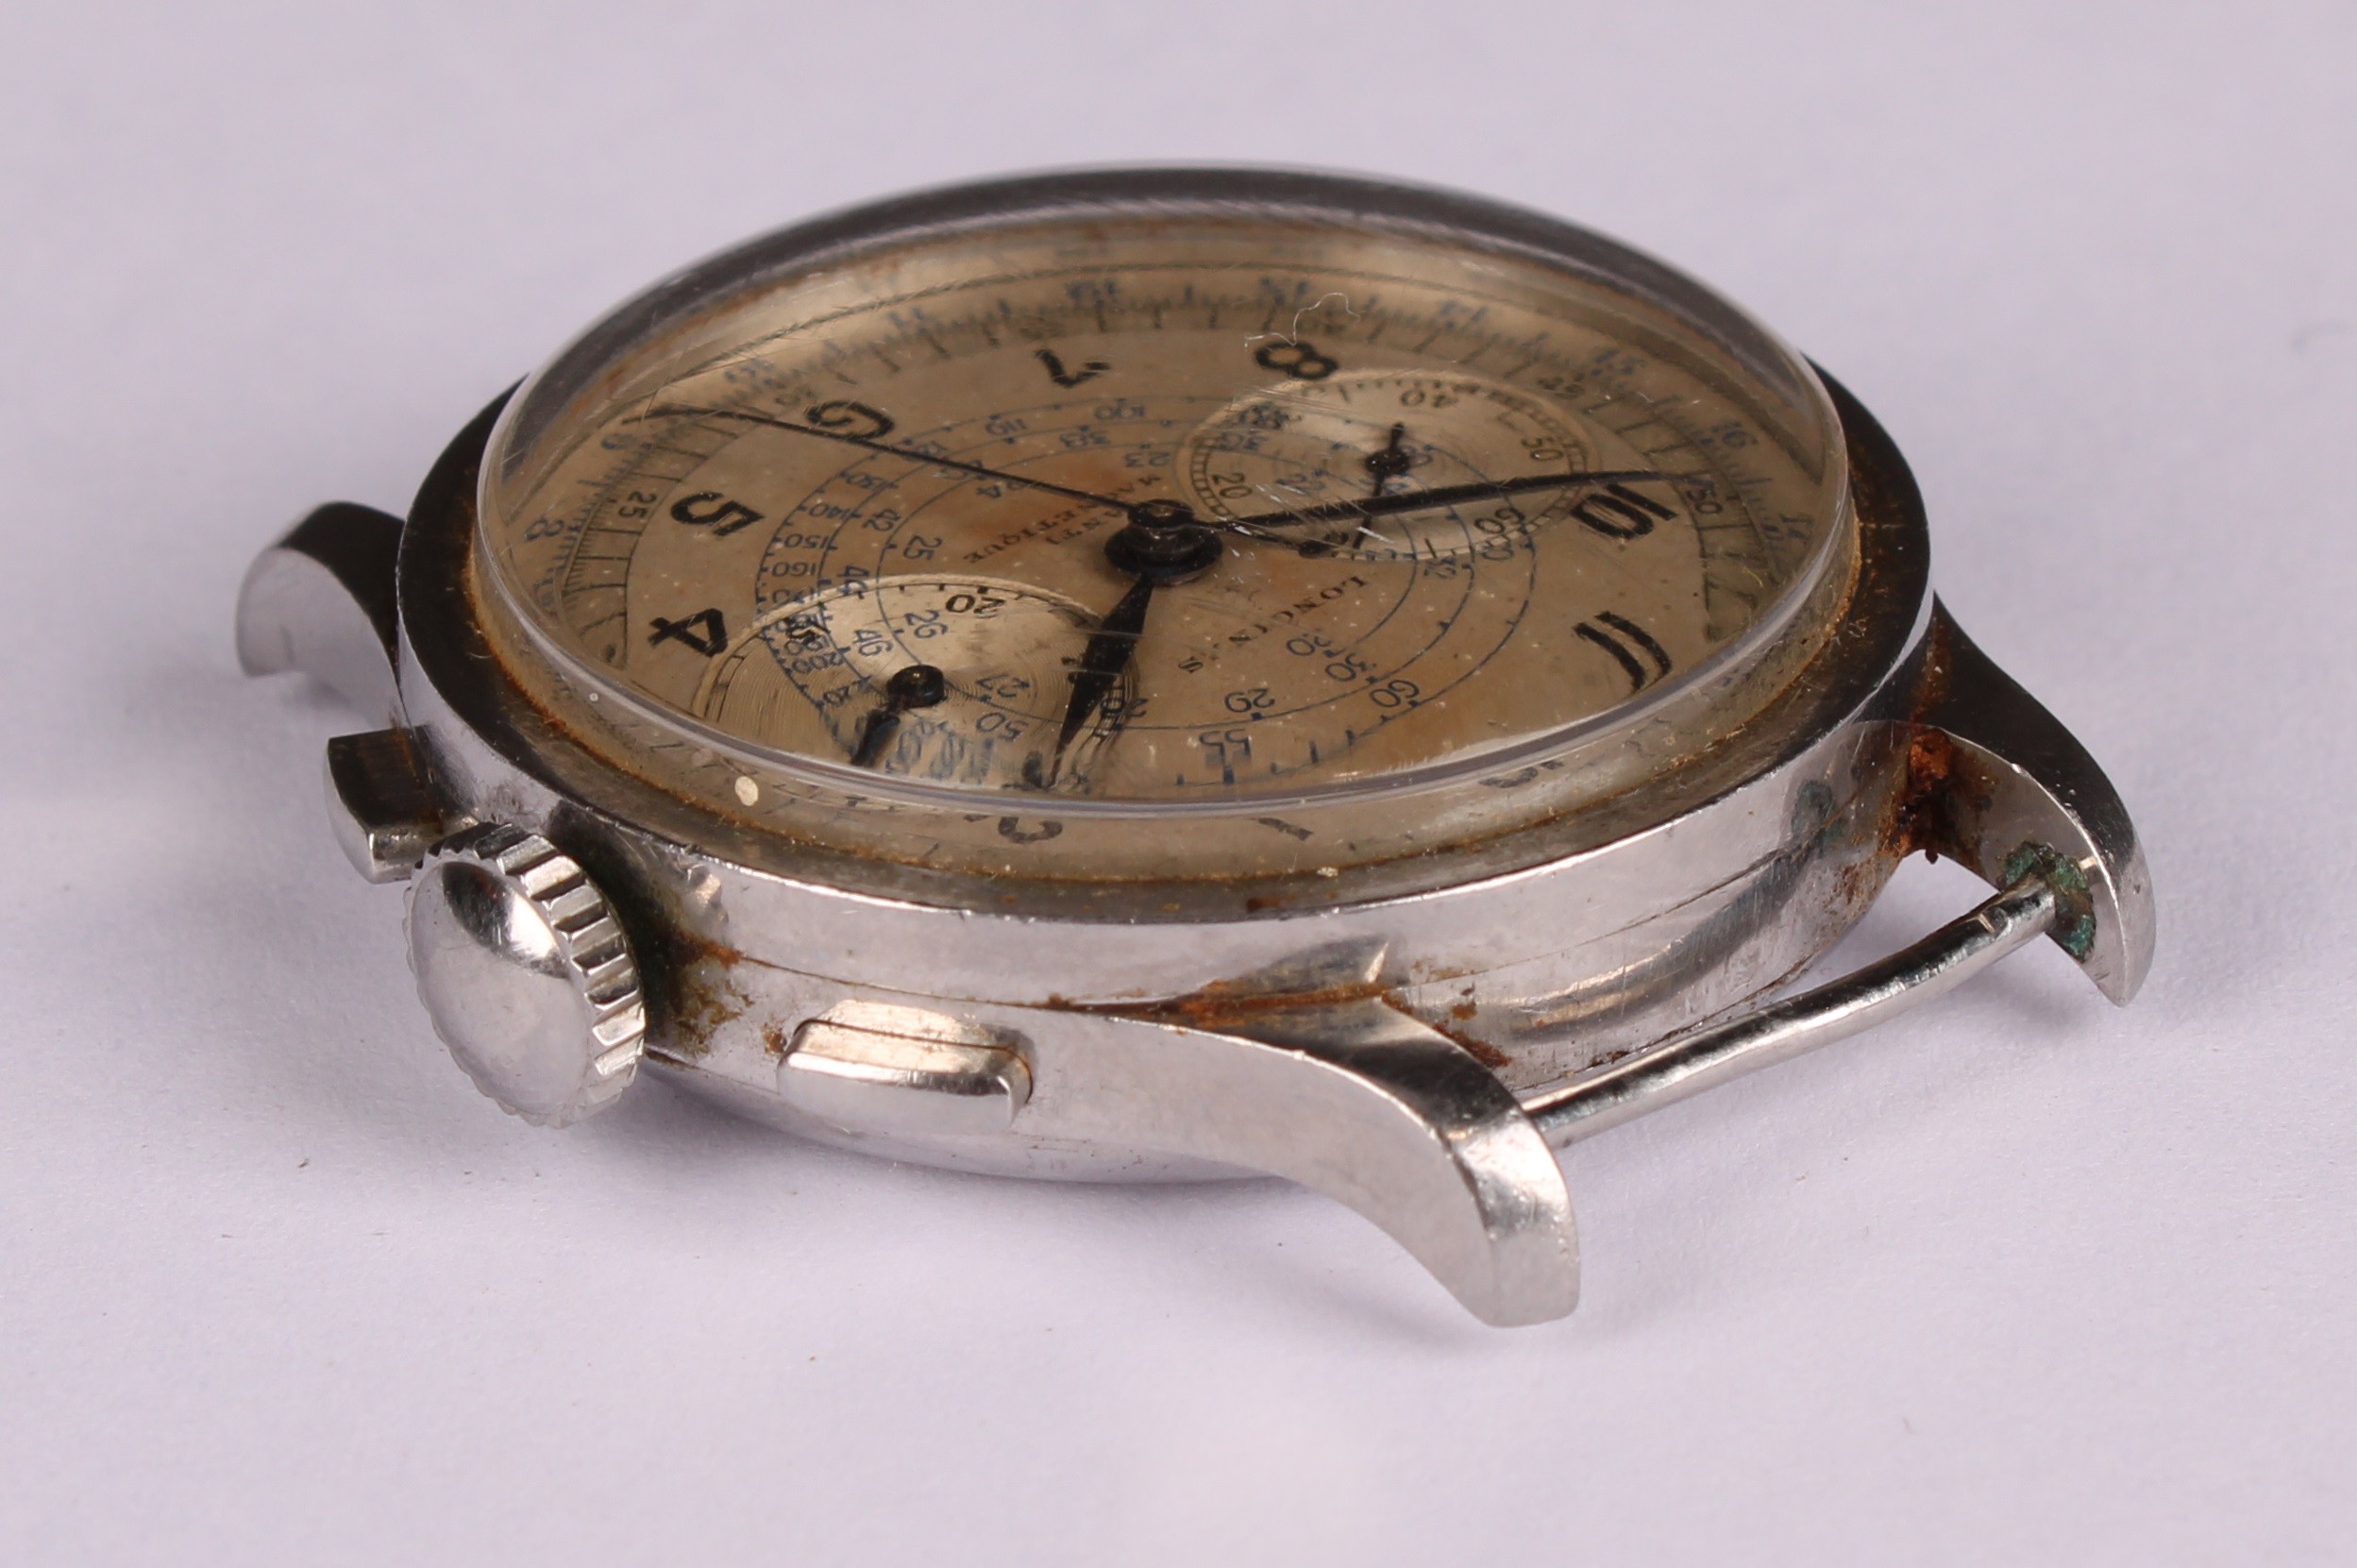 A Longines Telemetre stainless steel chronograph watch, silvered dial with Arabic numerals, pair - Image 4 of 5